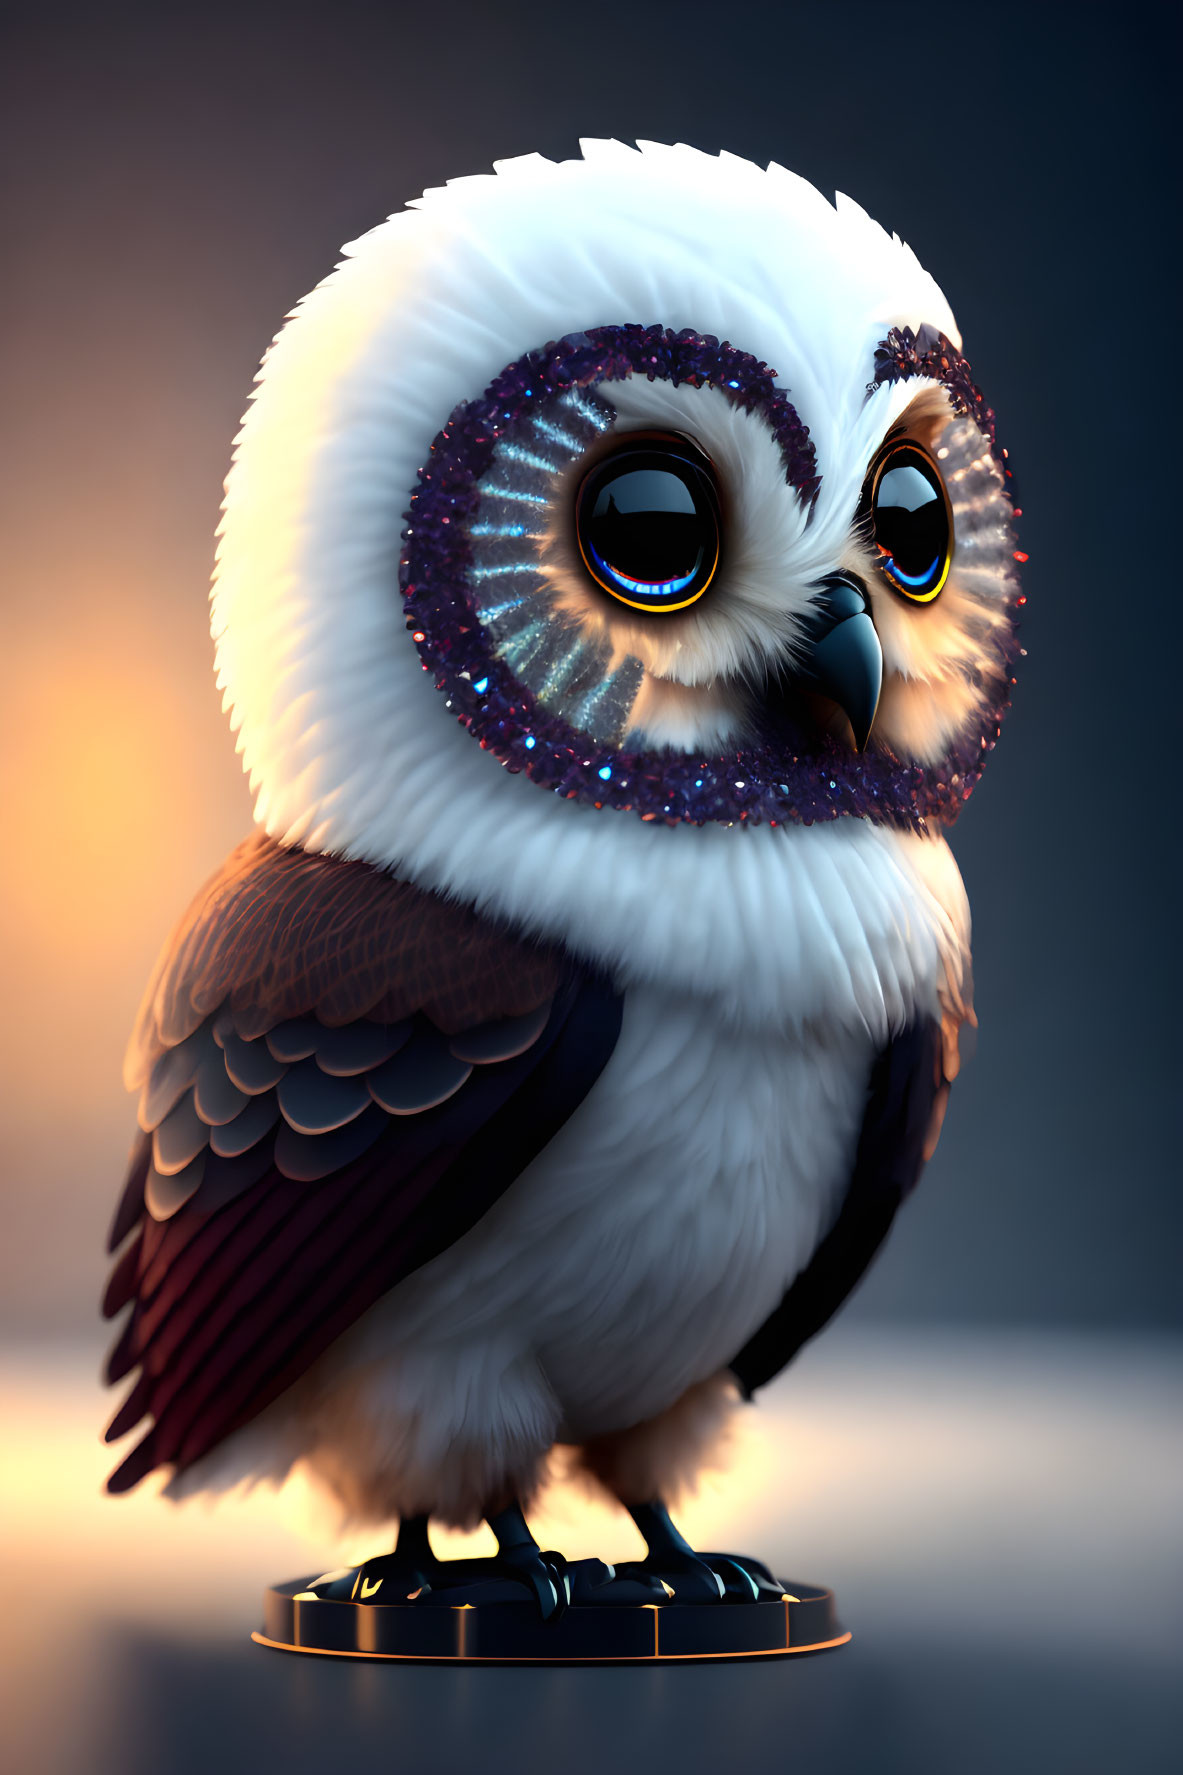 Stylized digital illustration of cute owl with oversized sparkling eyes, white and purple feathers